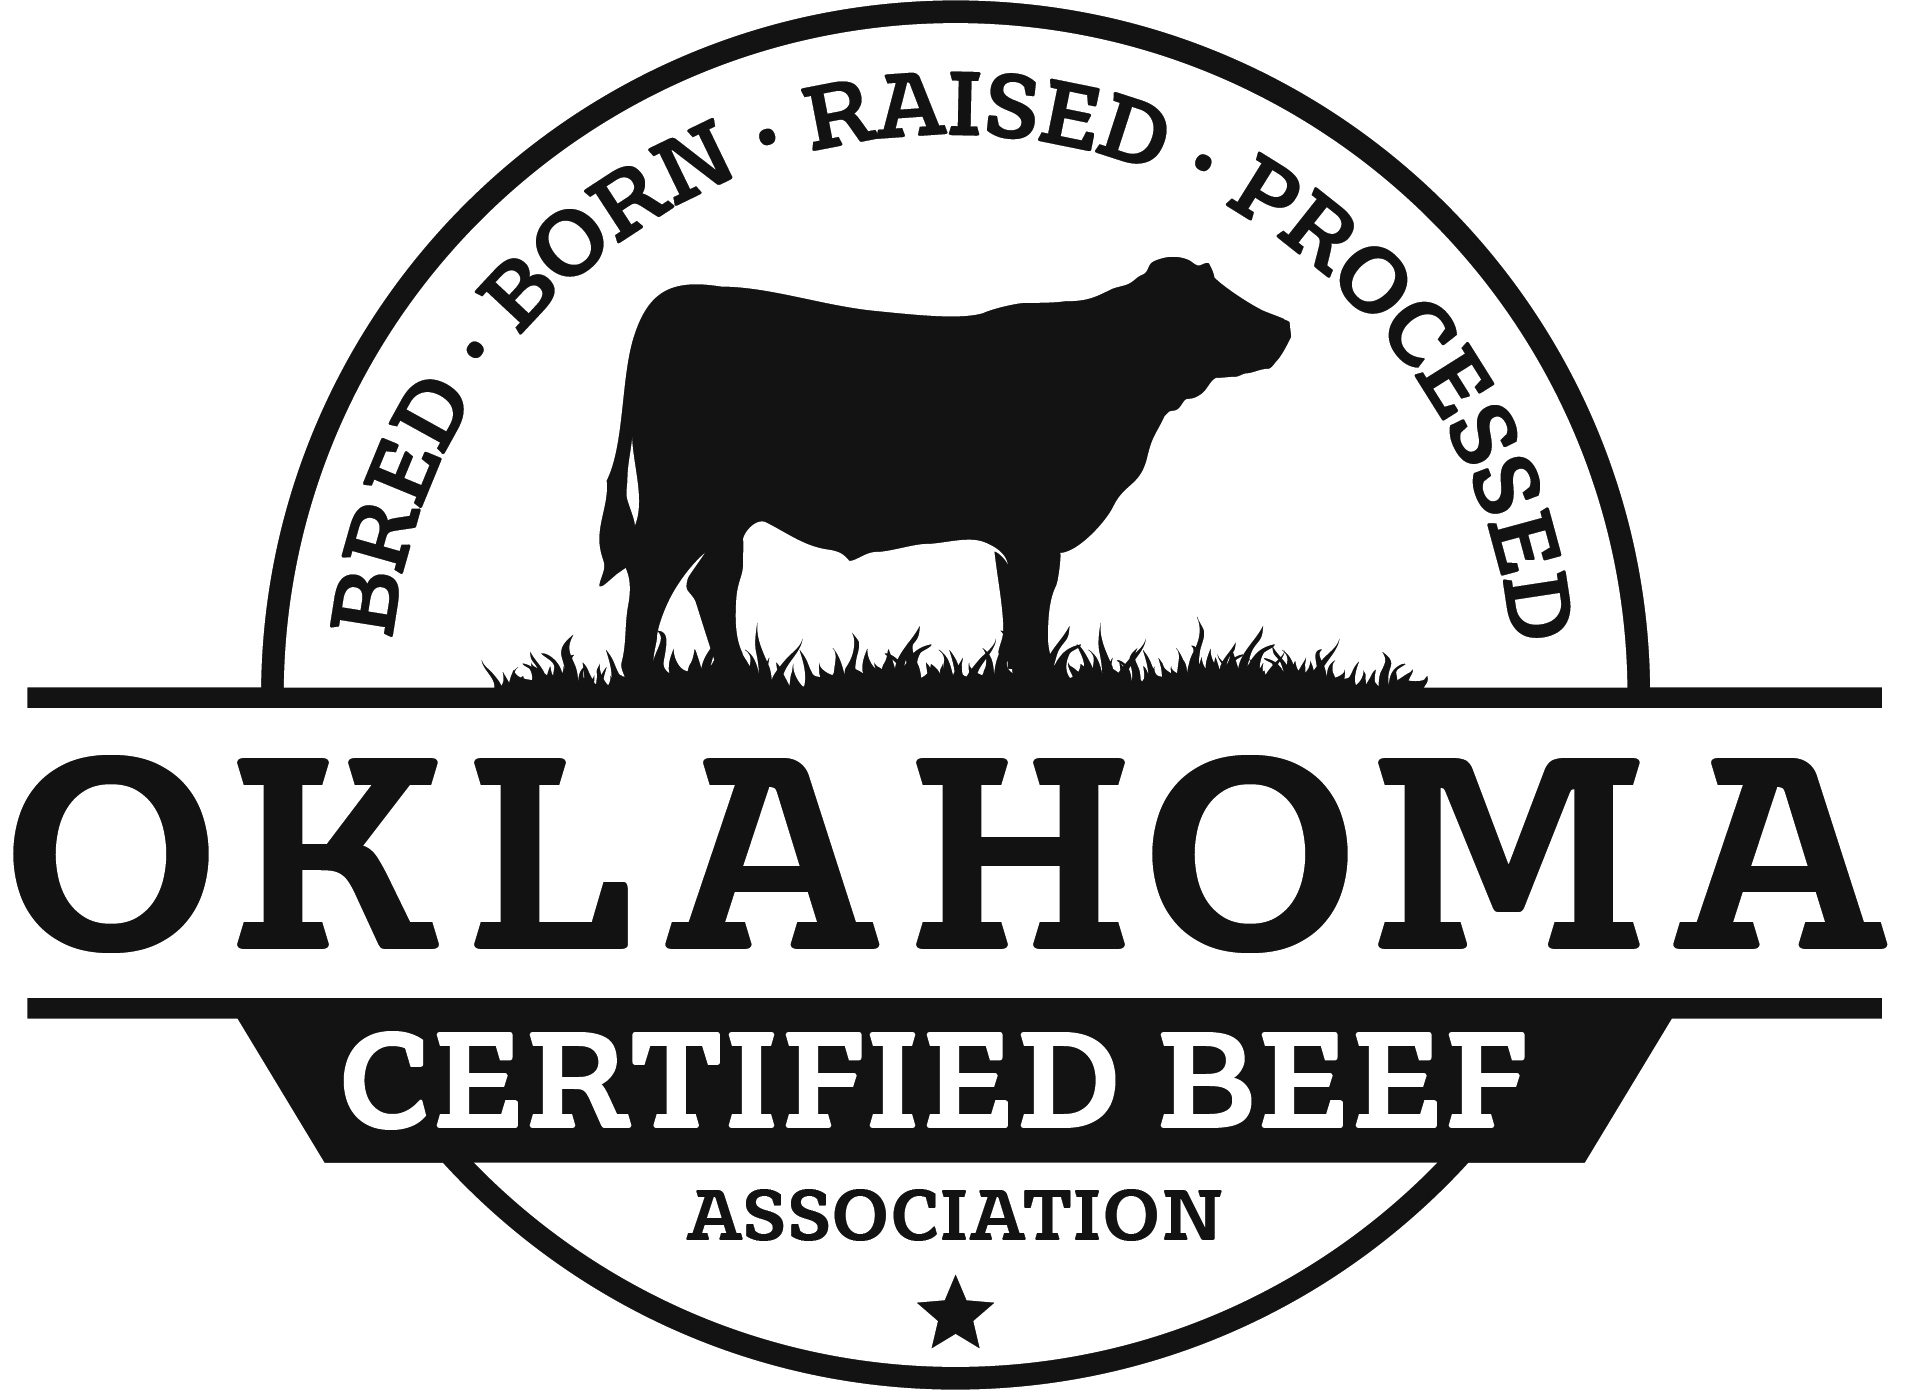 Oklahoma Certified Beef Association Formed to Provide Consumers Oklahoma Certified Beef